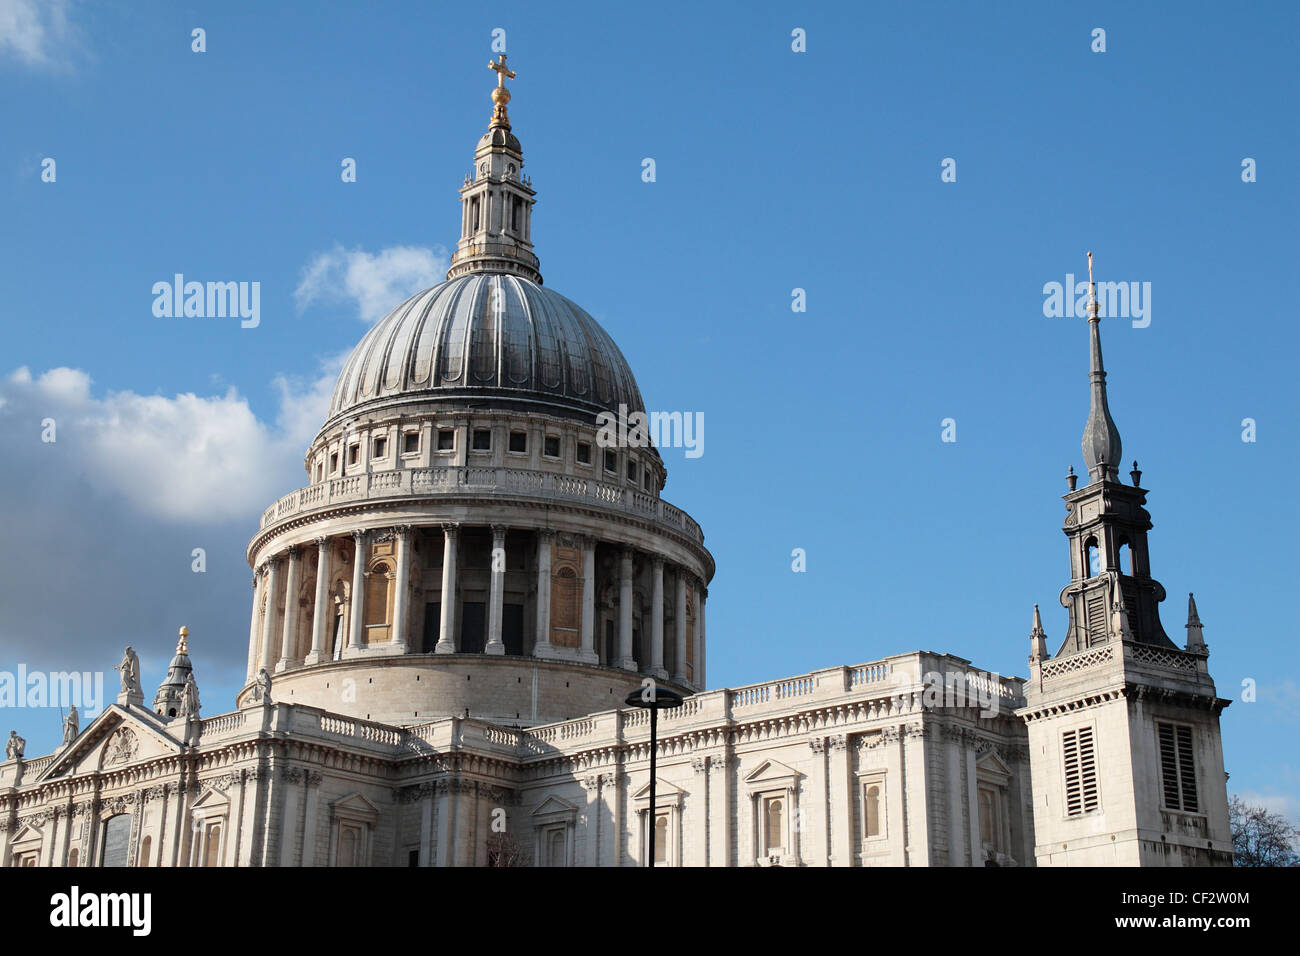 The Dome of St Paul's Cathedral, London against a blue sky.. Stock Photo